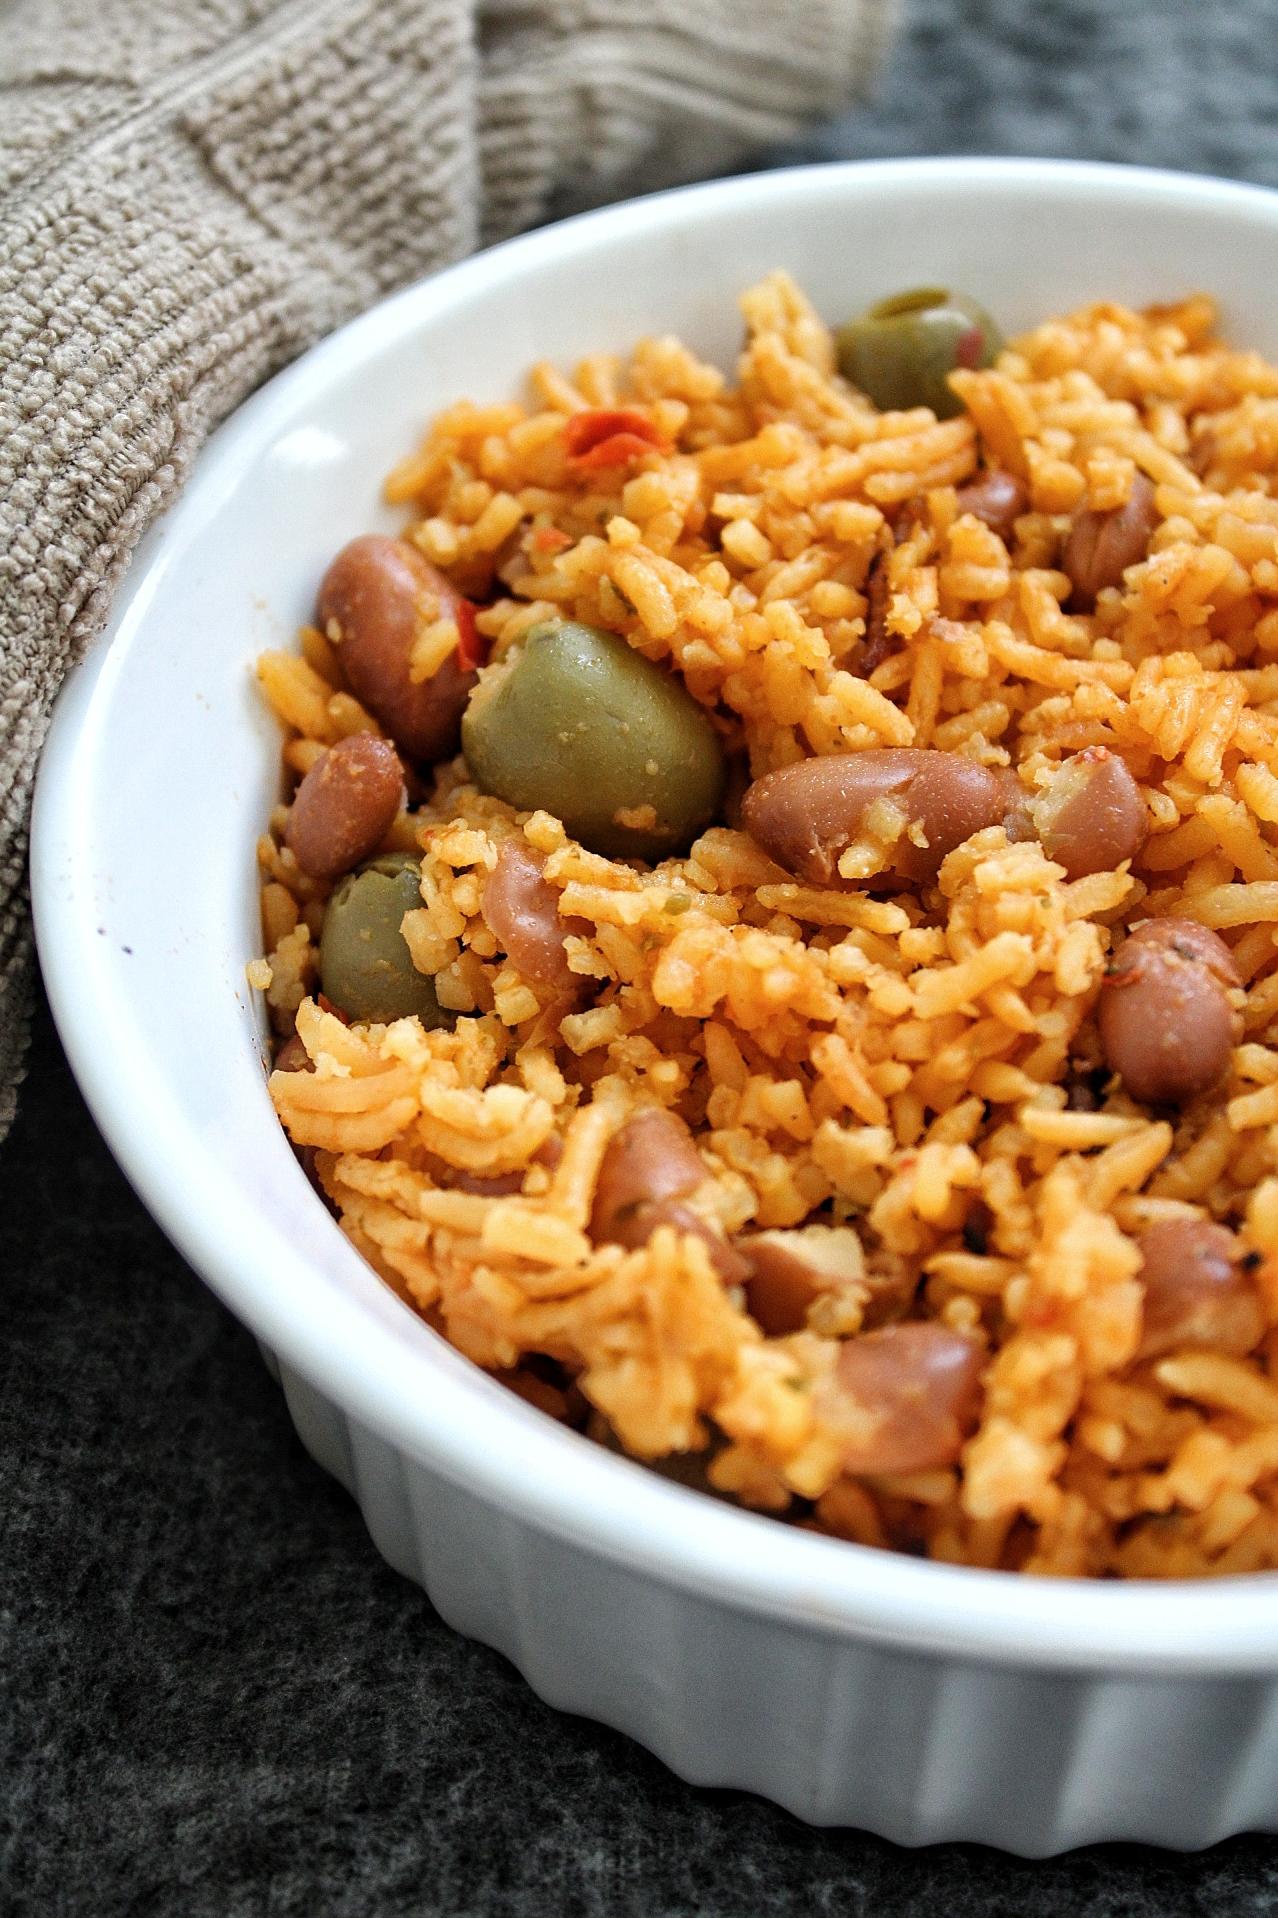  The beans add a touch of sweetness and soft texture, while the rice soaks up all of the savory goodness.